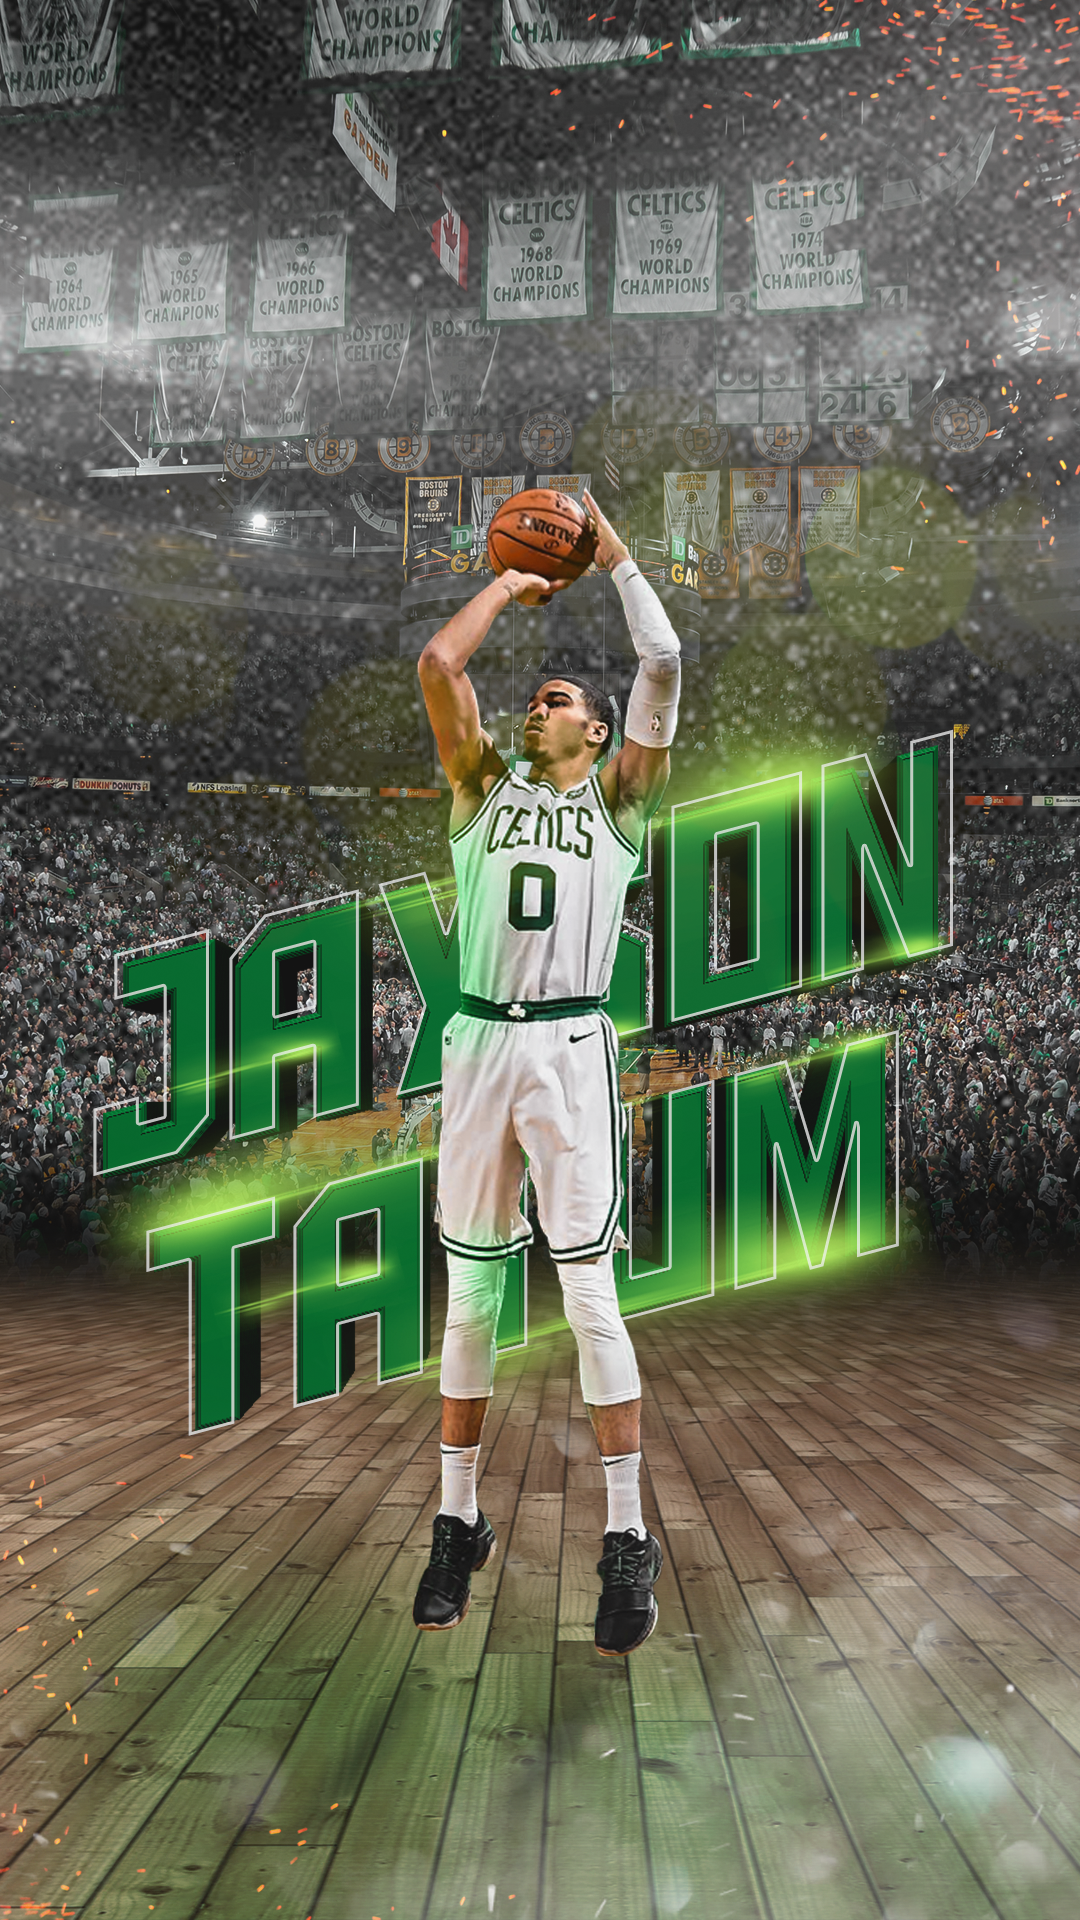 Any cool wallpapers for phones? : bostonceltics